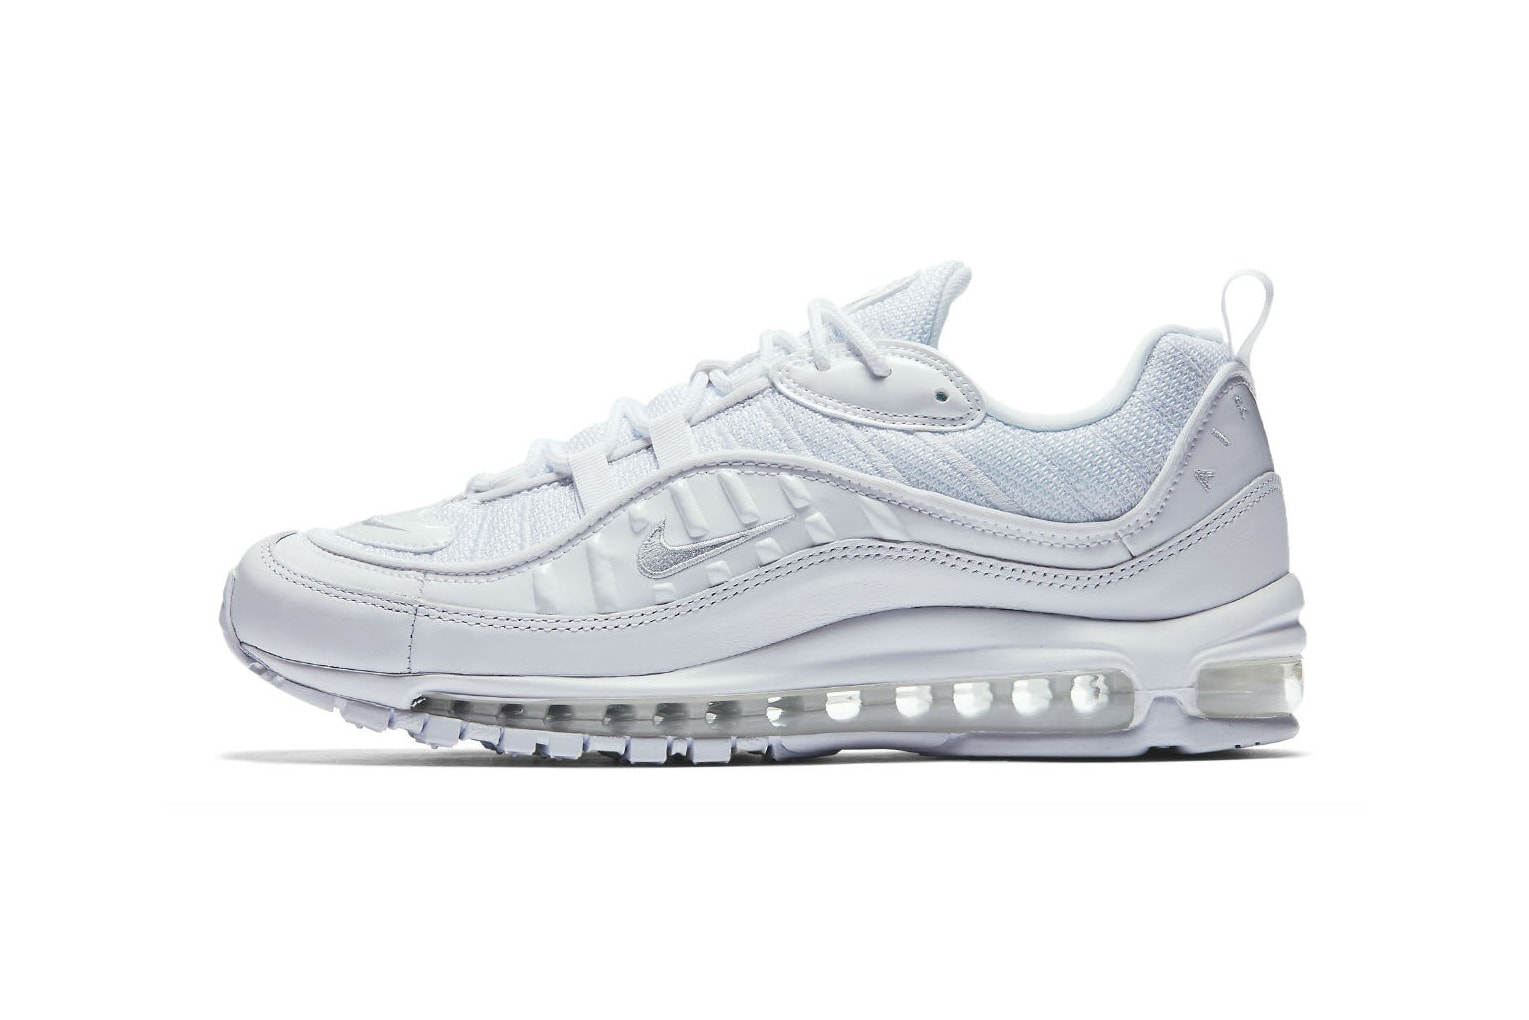 Nike Air Max 98 Triple White Pure Platinum Reflective Silver 2018 february 9 release date info sneakers shoes footwear 640744 106